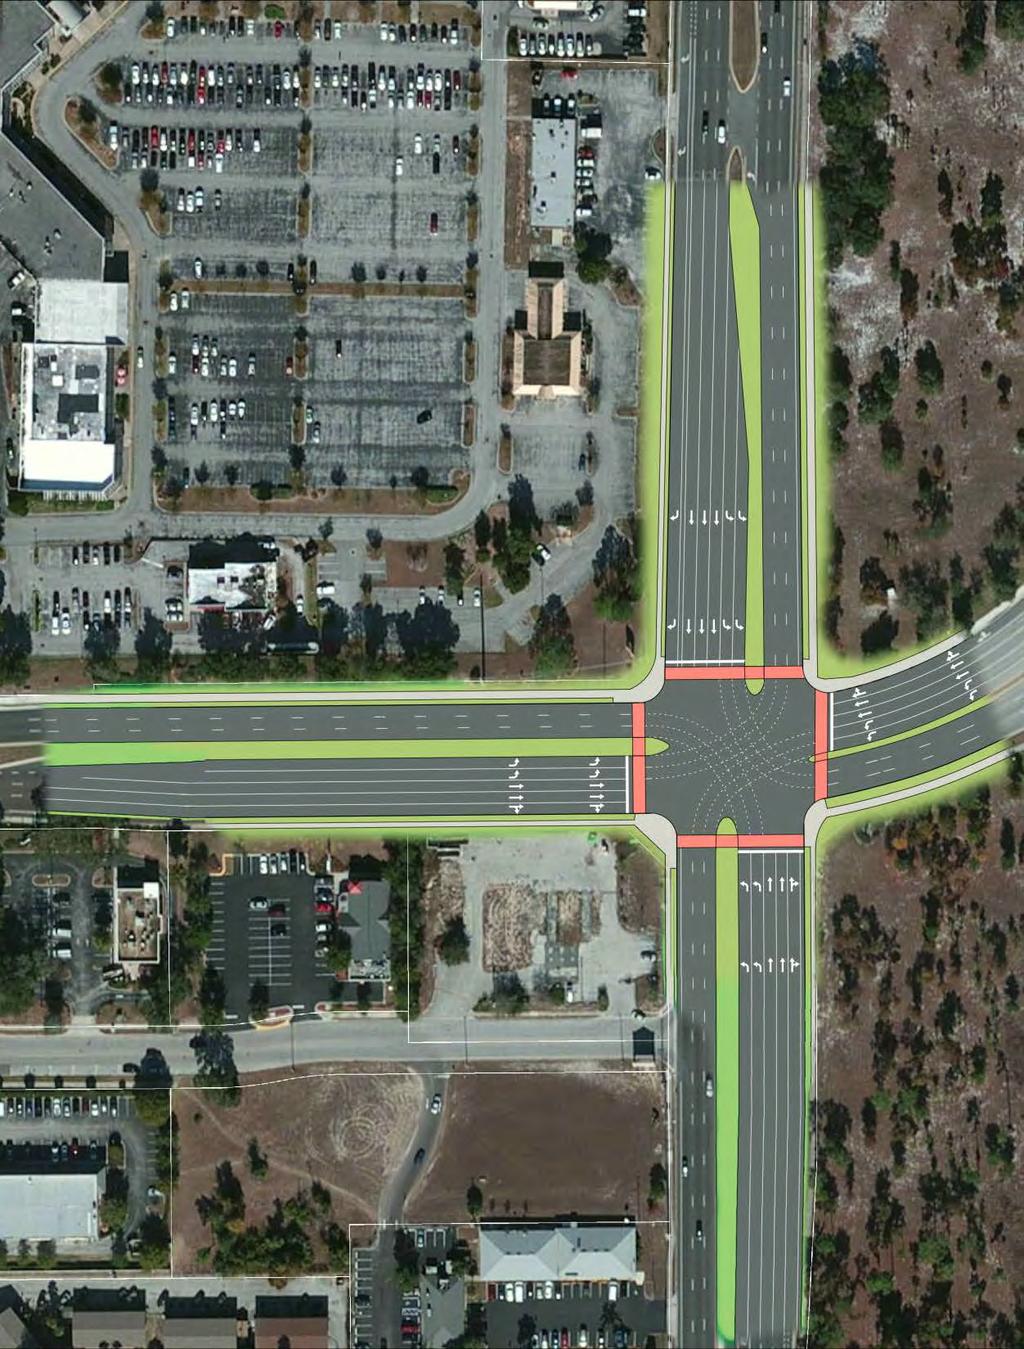 Alafaya Tr. and University Blvd. Crossing Treatments Reduce turn radii on all four corners to 25 Create pedestrian refuge by extending and widening medians University Blvd.